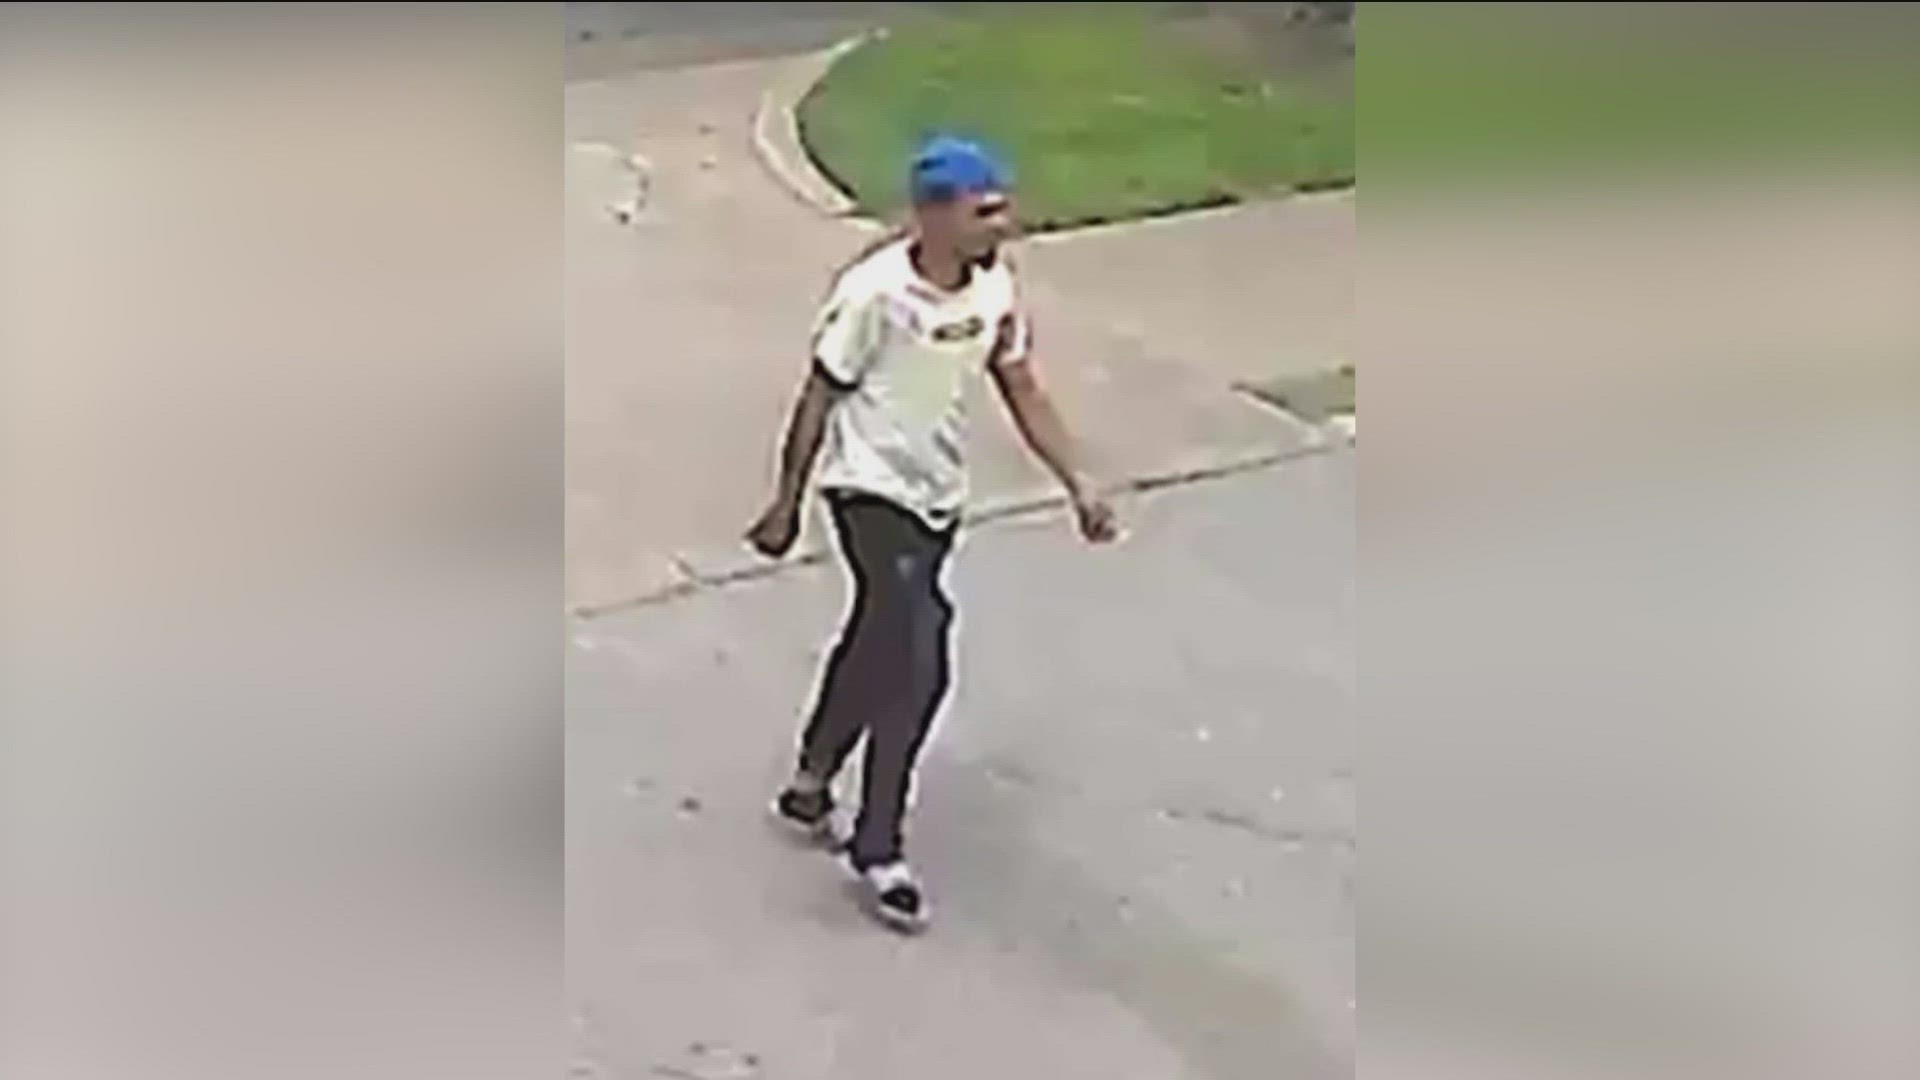 Austin police are asking the public to help identify a suspect involved in an assault.